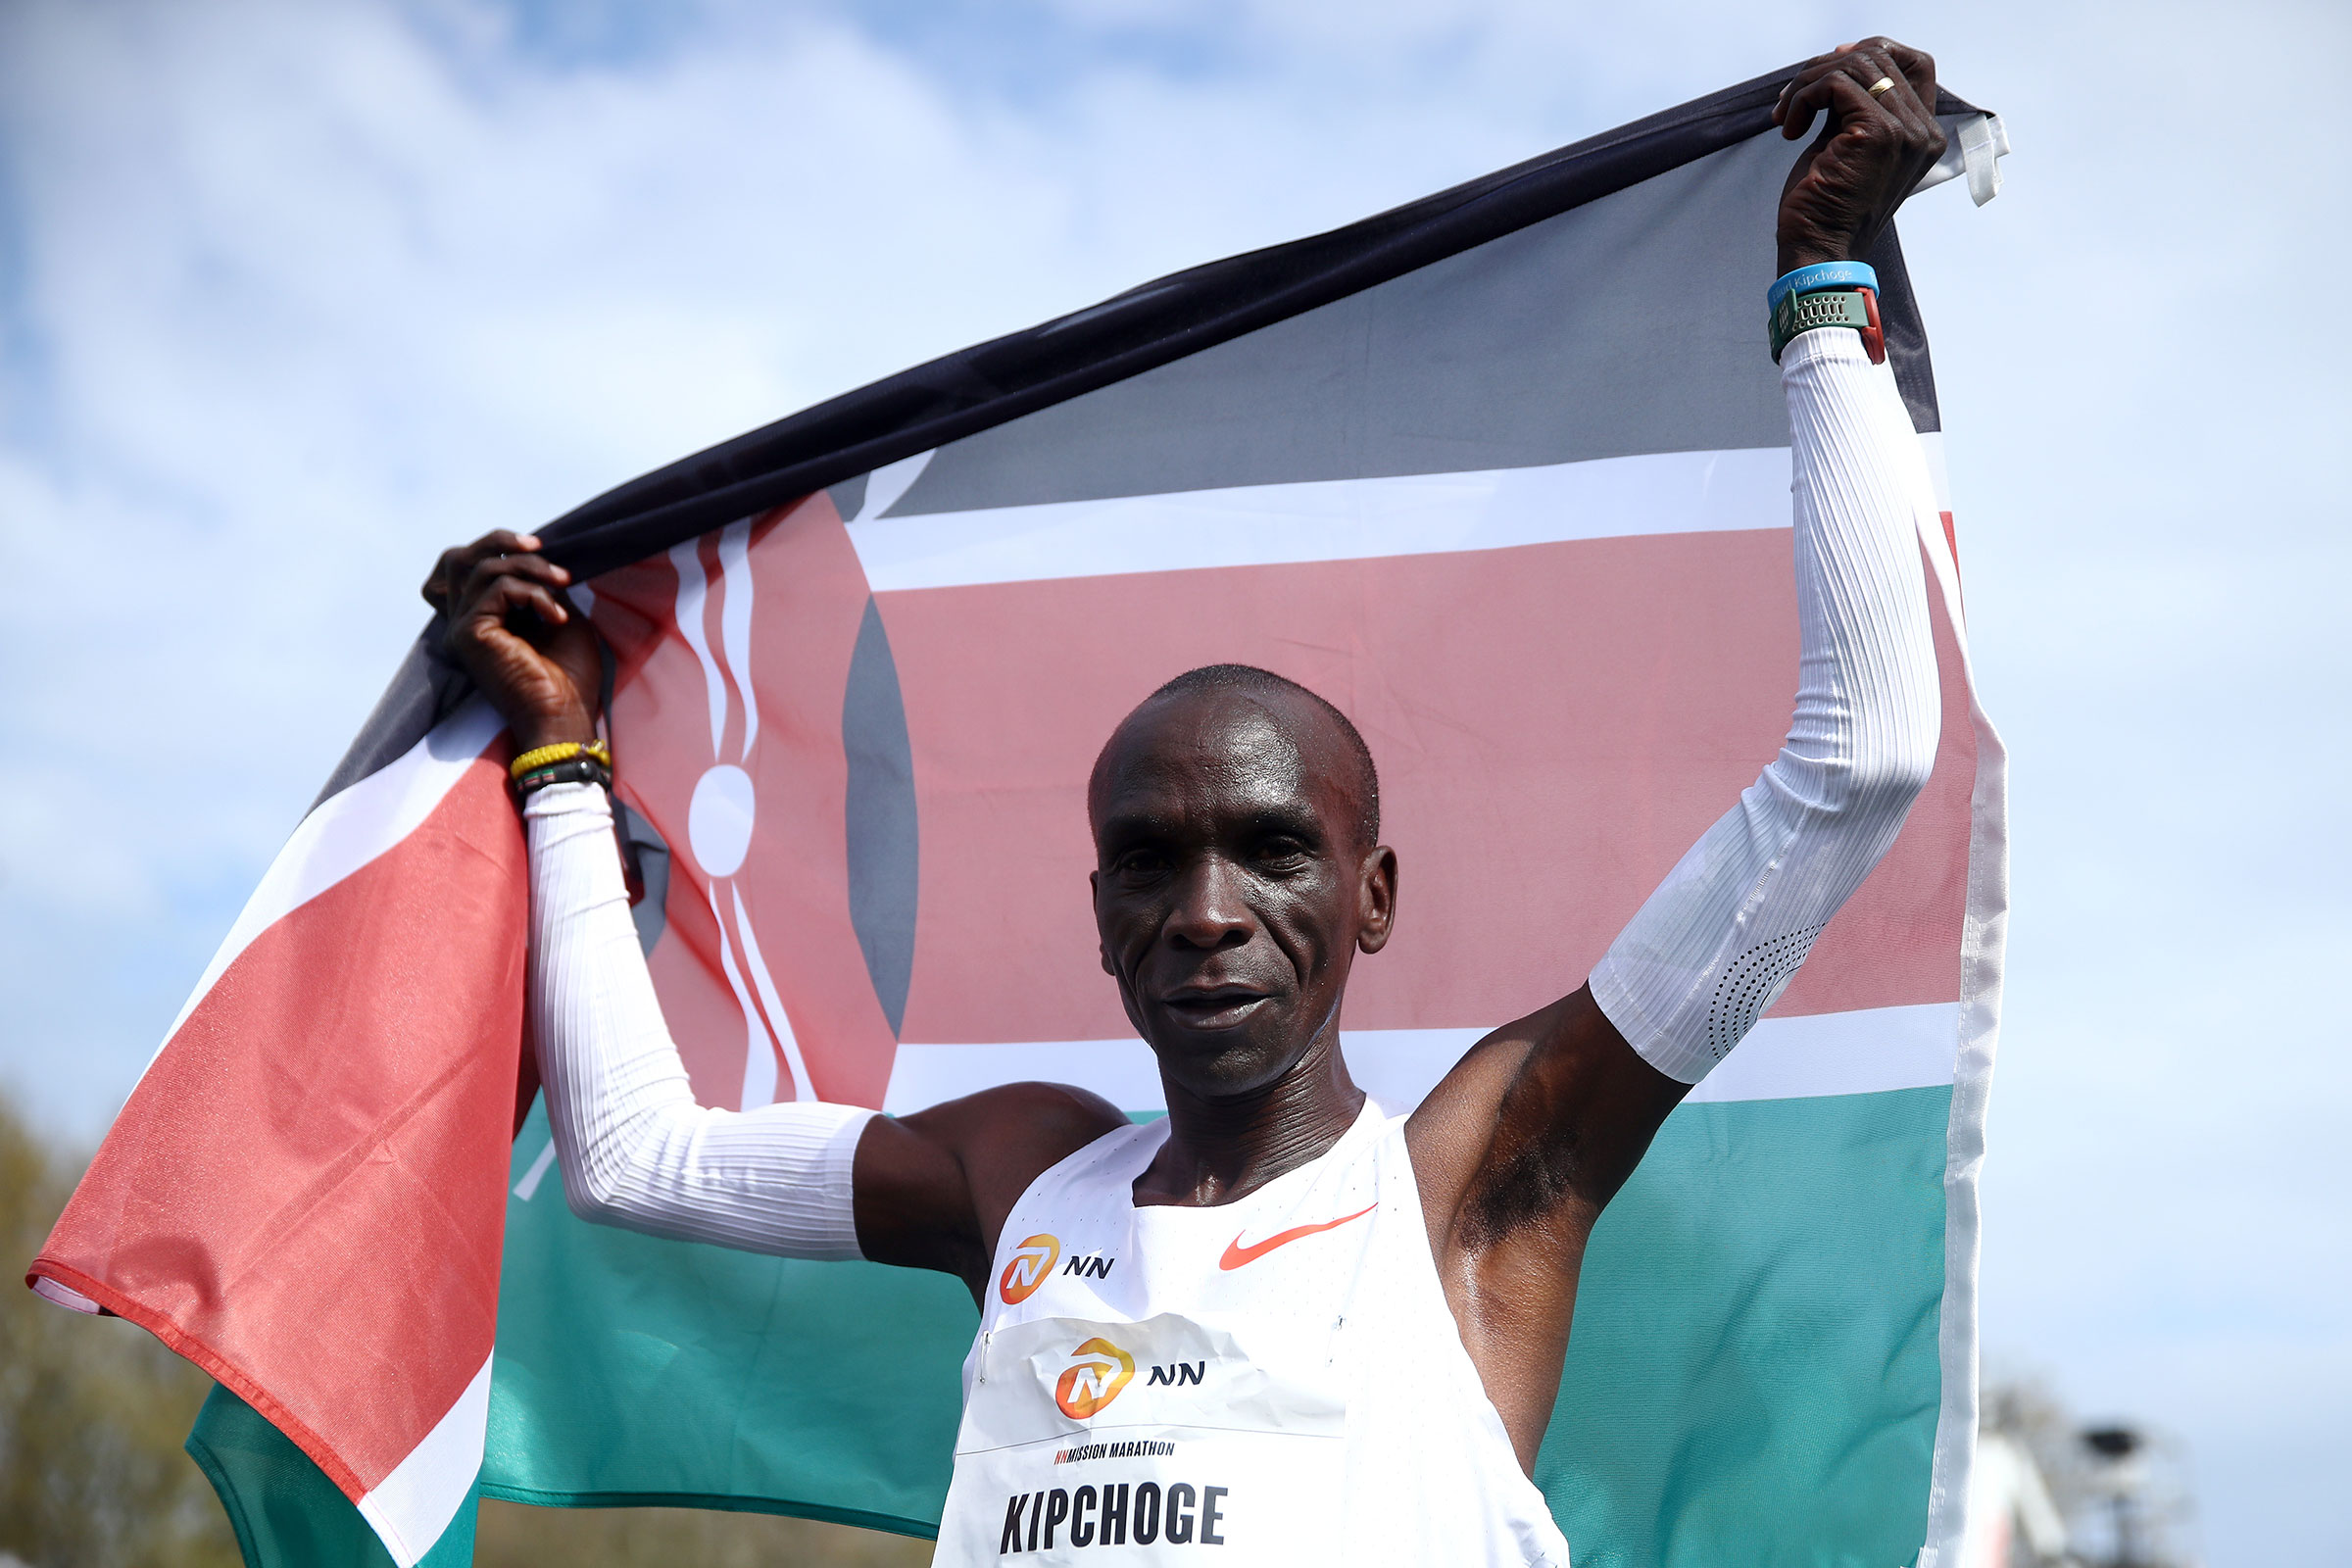 Eliud Kipchoge of Kenya, winner of the gold medal, crosses the finishing line and celebrates with a flag during the NN Mission Marathon held on April 18, 2021 in Enschede, Netherlands. (Dean Mouhtaropoulos—Getty Images)